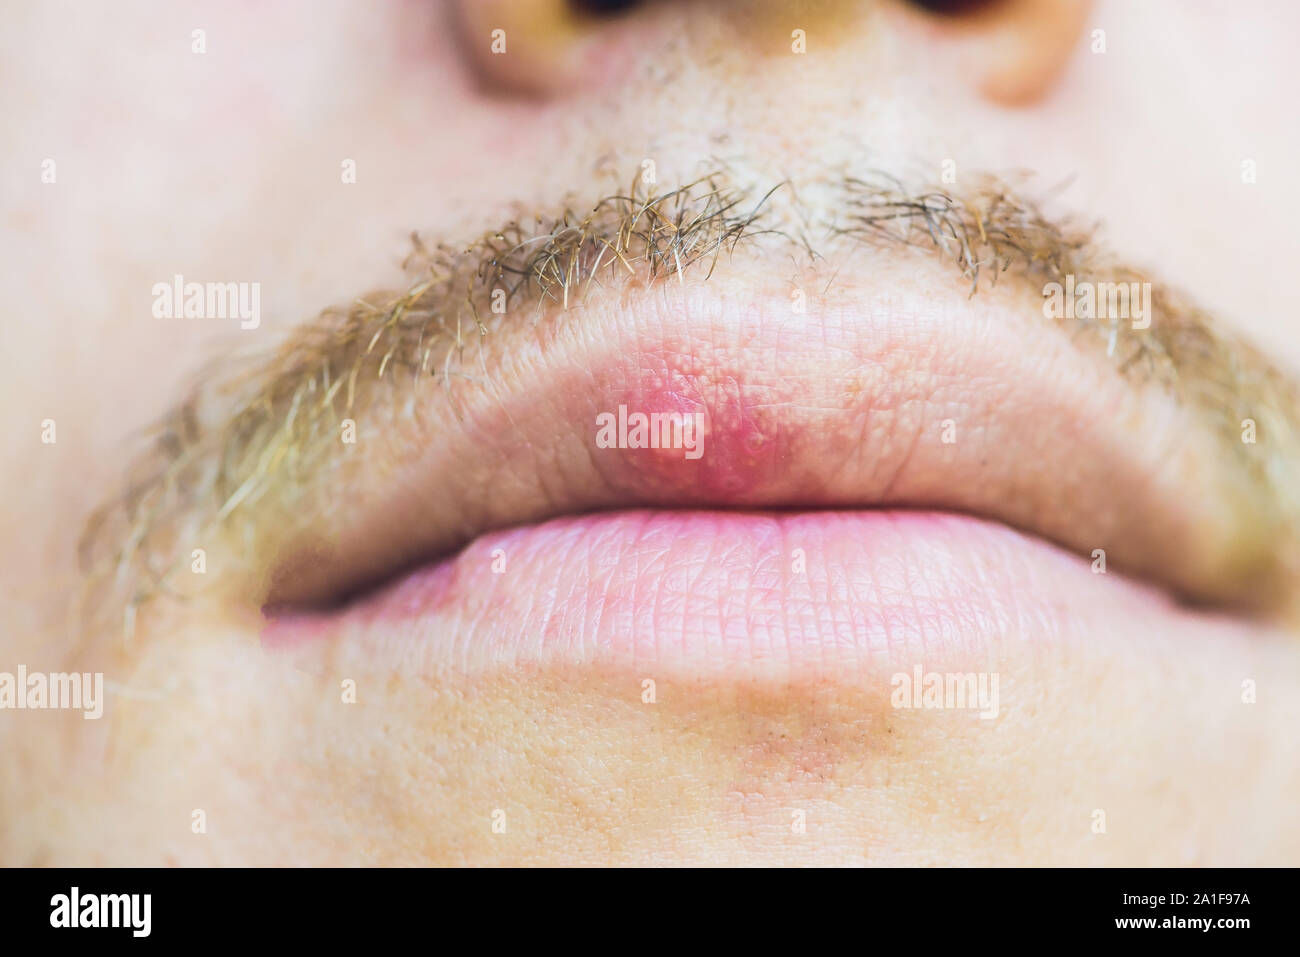 Virus herpes infected on male lip, closeup. Stock Photo